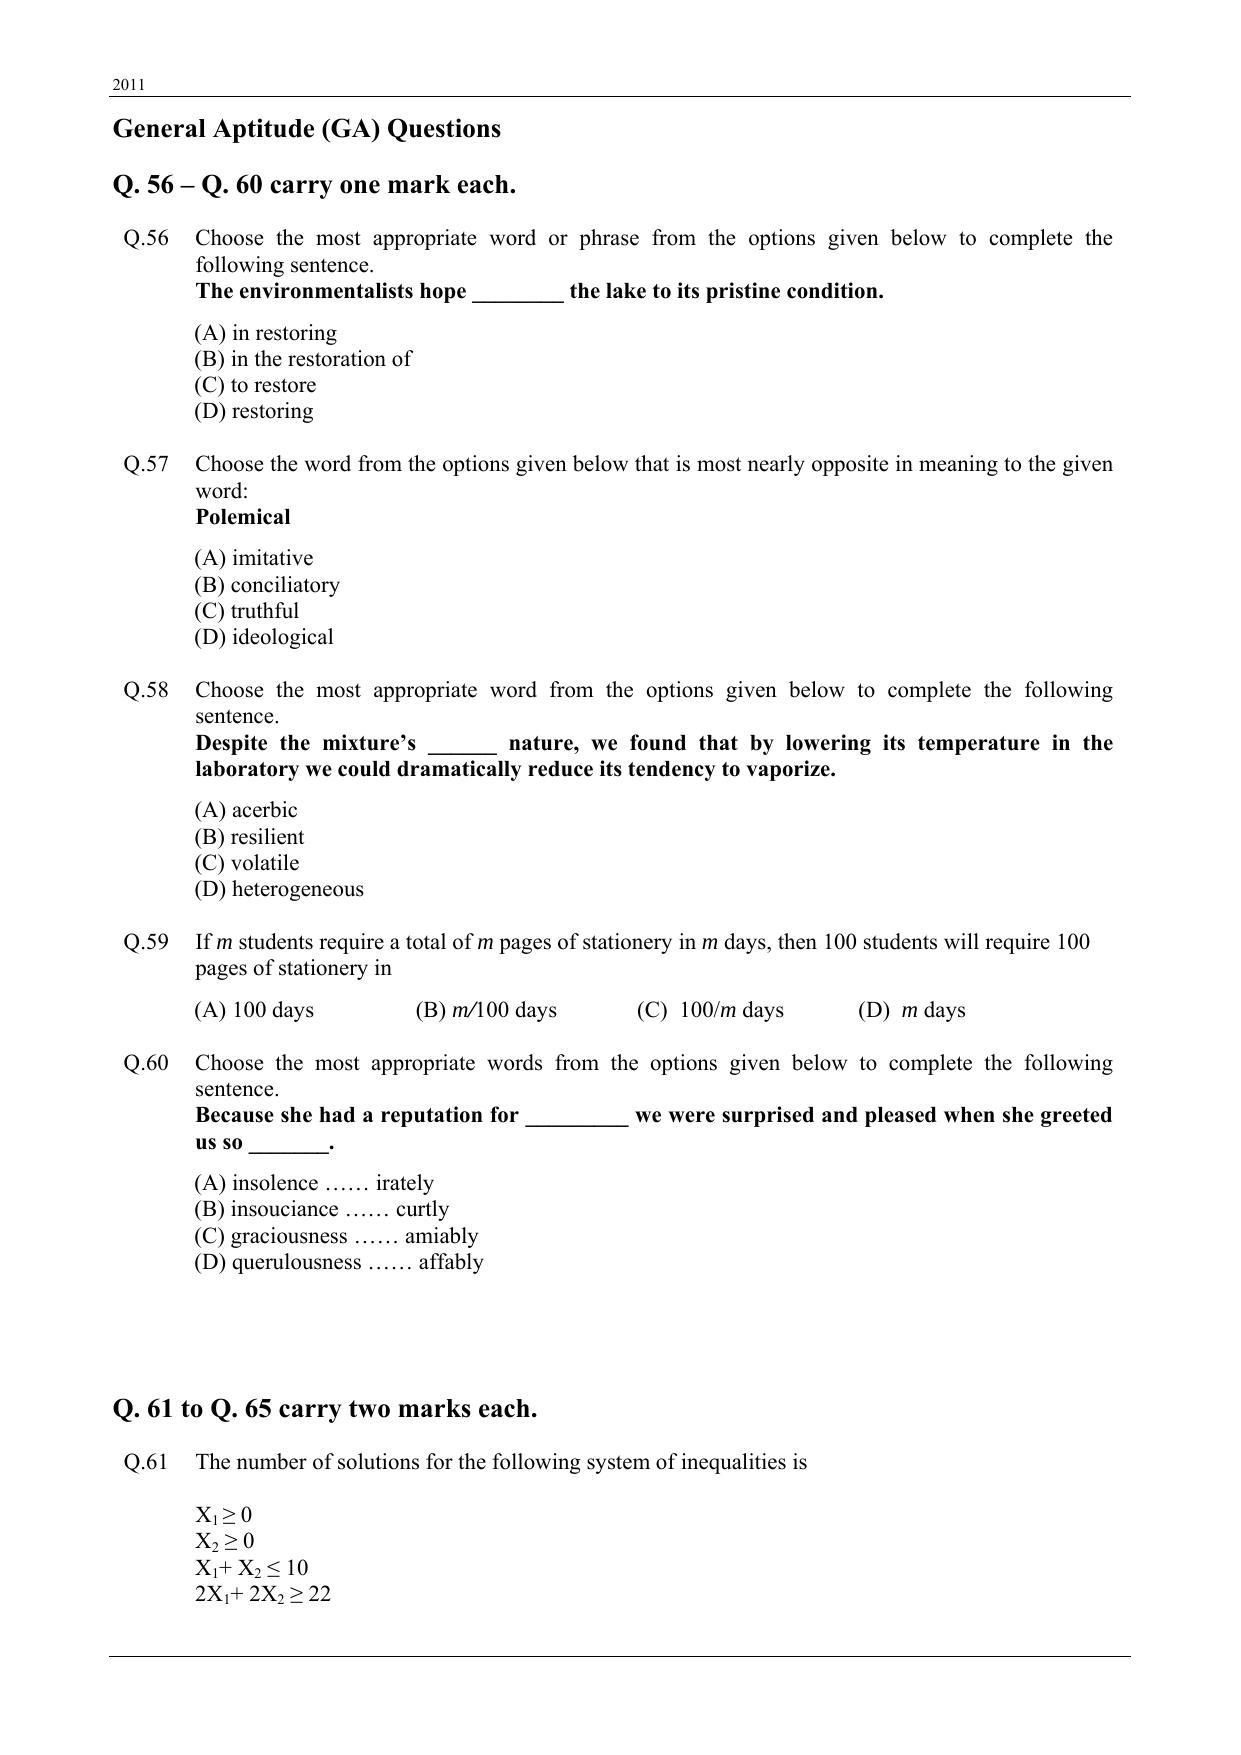 GATE 2011 Textile Engineering and Fibre Science (TF) Question Paper with Answer Key - Page 10